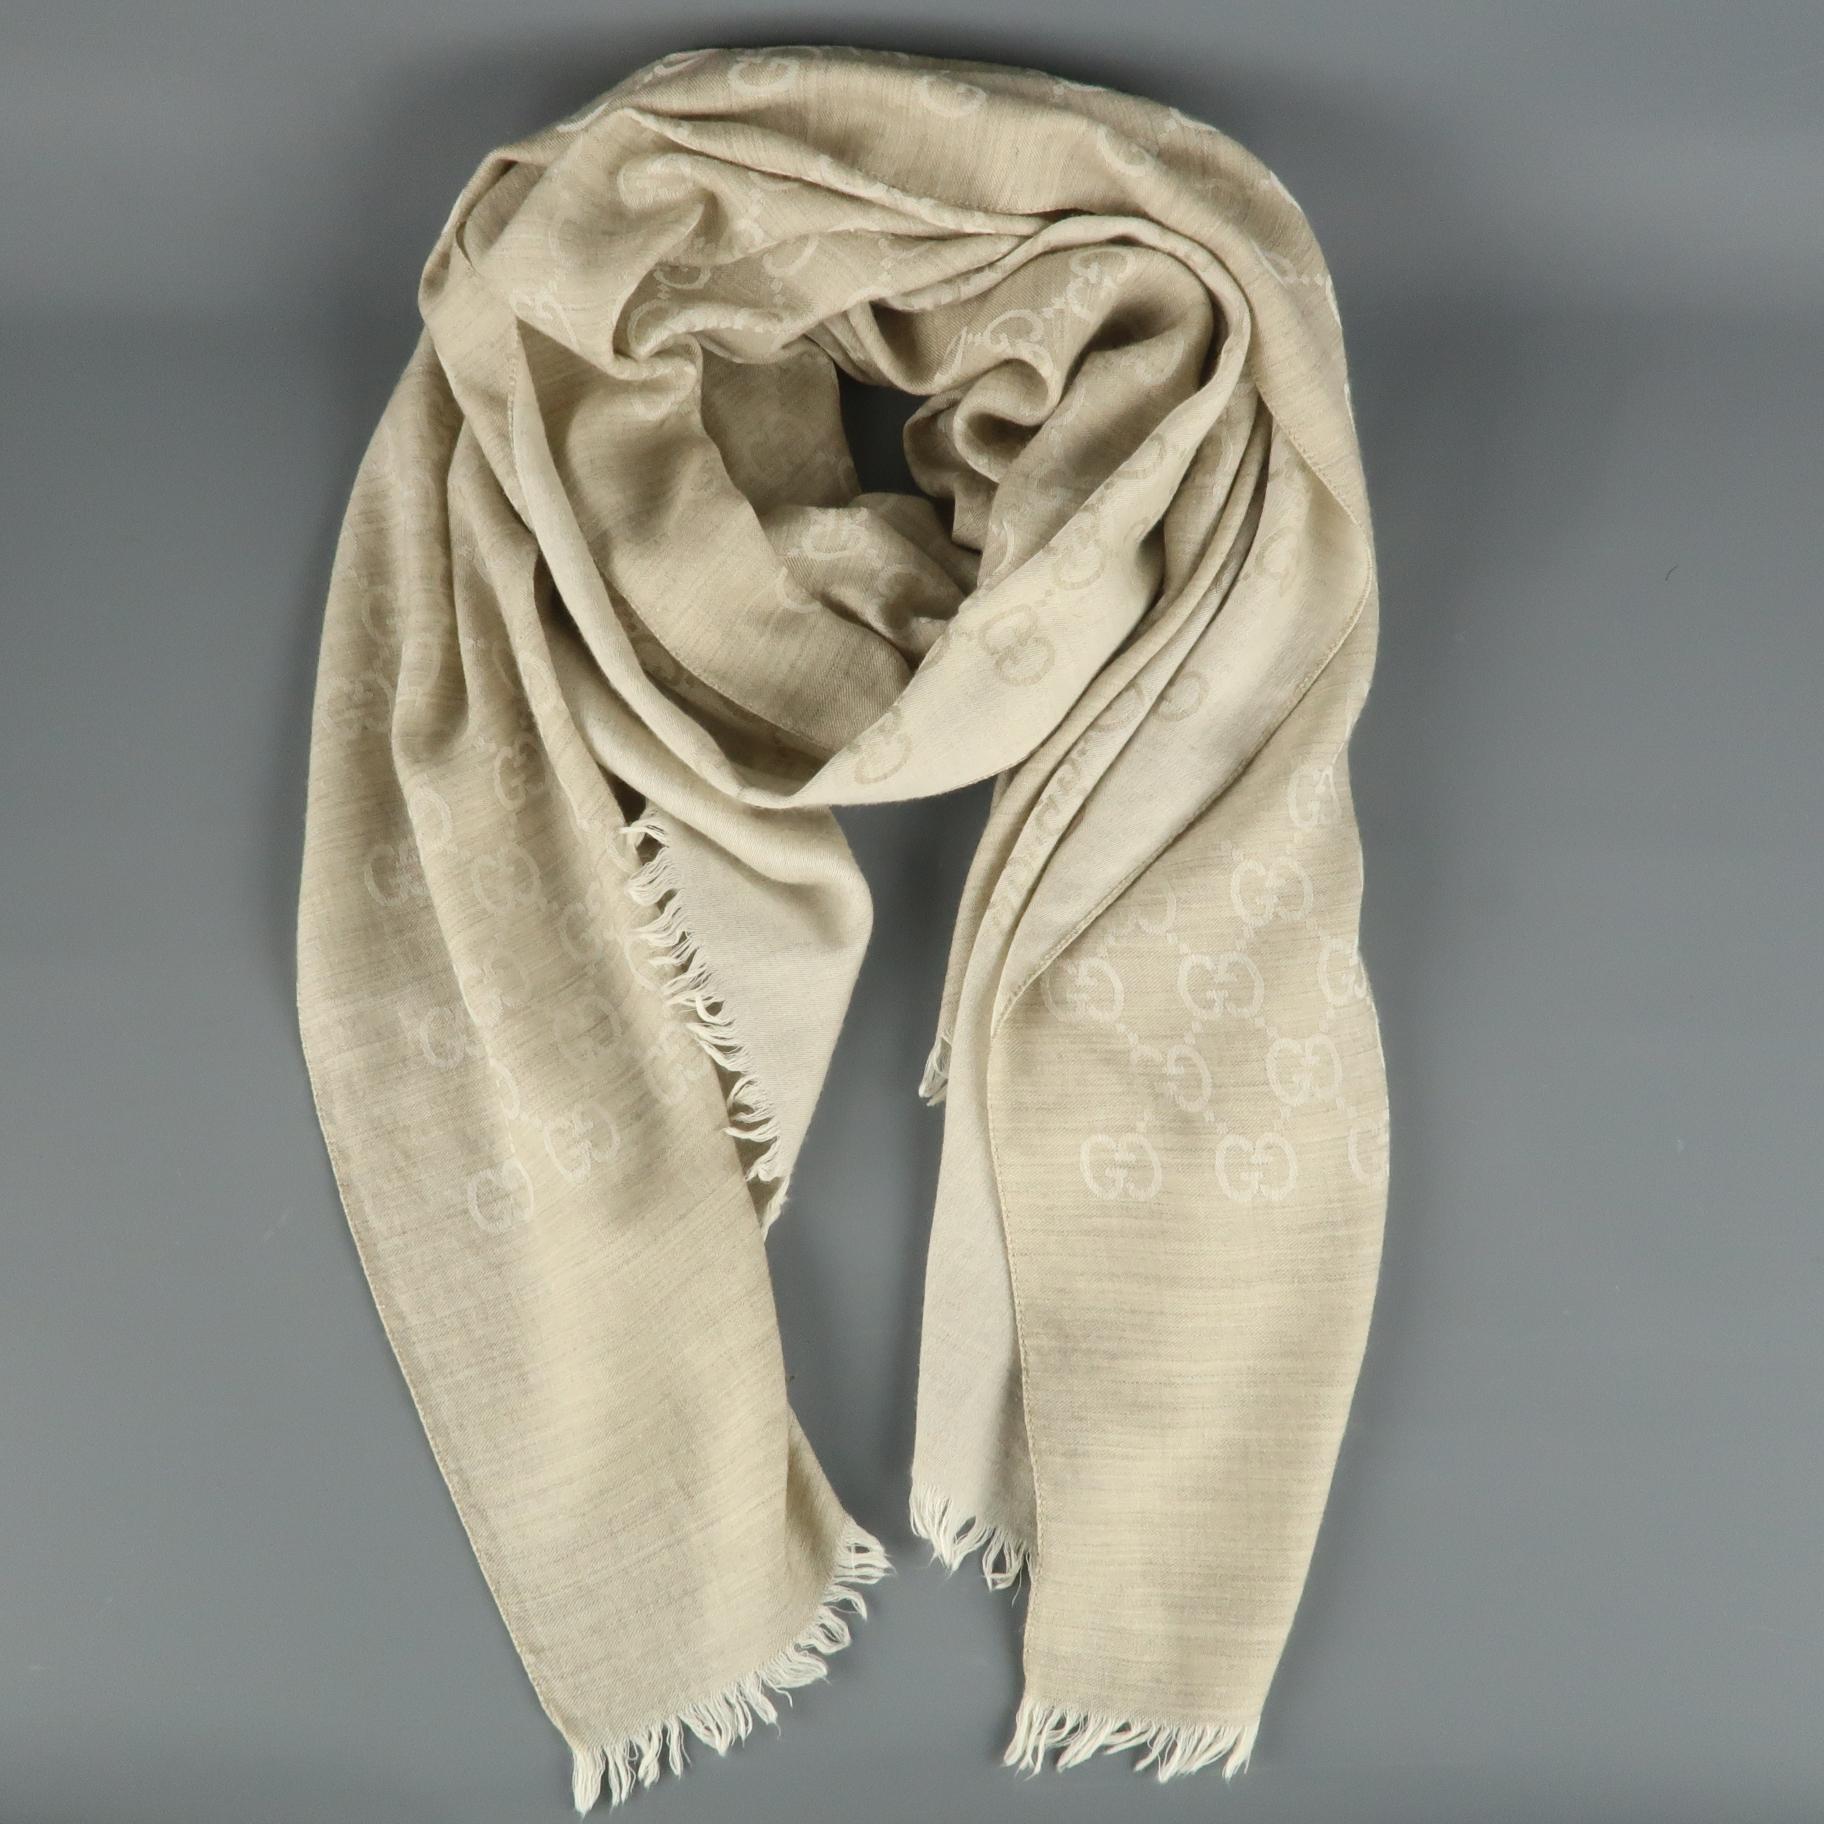 GUCCI scarf comes in oatmeal beige wool silk blend kit with Guccisima print throughout and frayed edges. Minor wear. As-is.
 
Good Pre-Owned Condition.
 
Measurements:
 
Length: 78 in
Width: 28 in.